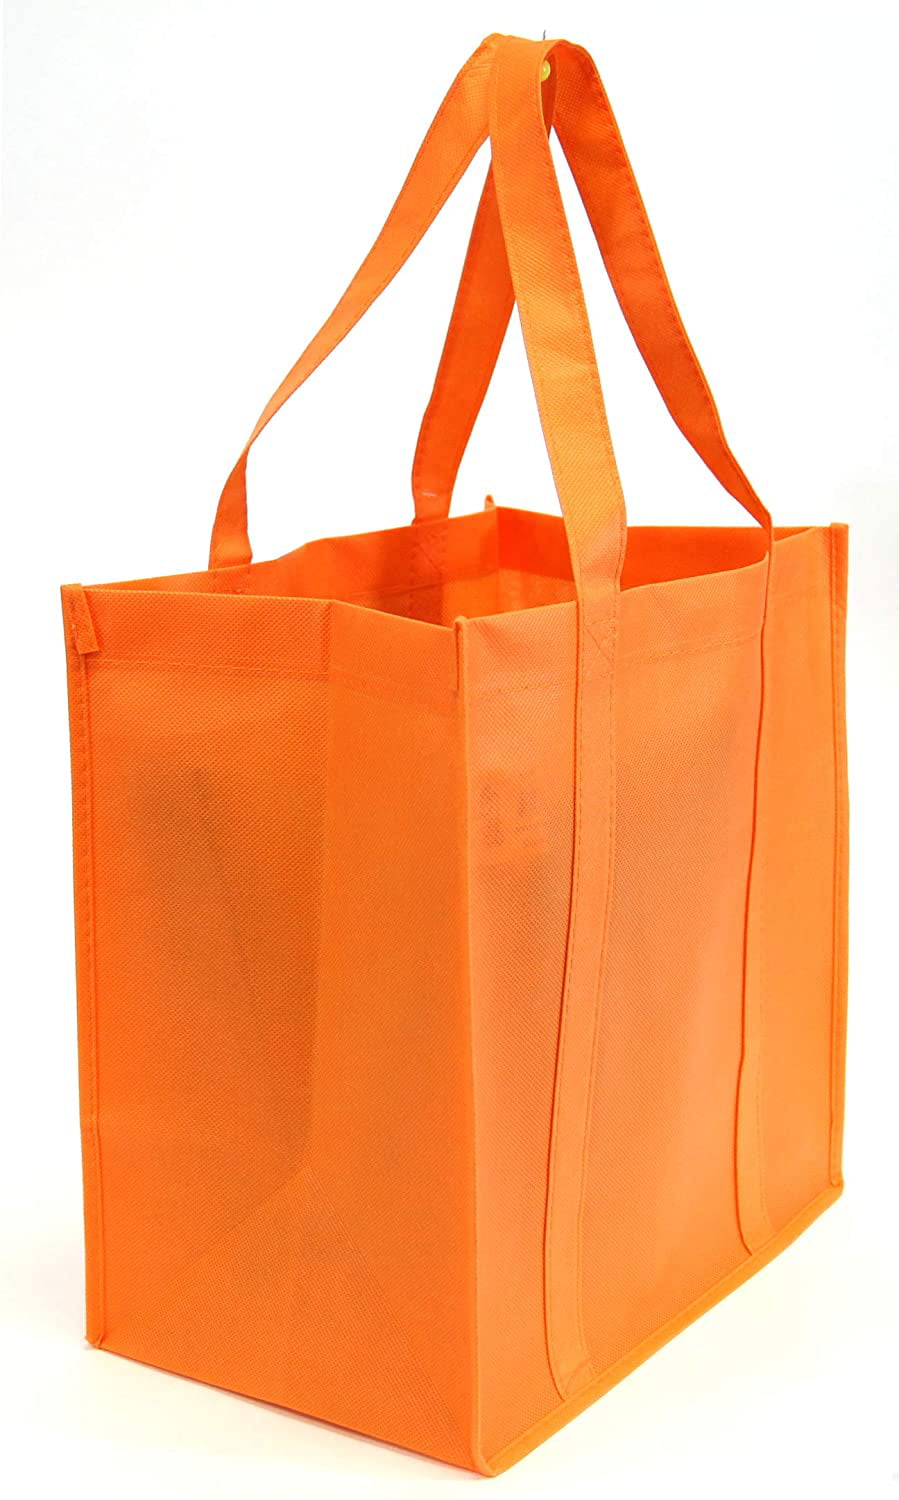 10 PACK Heavy Duty Grocery Tote Bag, Orange Large & Super Strong, Reusable Shopping  Bags with Stand-up PL Bottom, Non-Woven Convention Tote Bags, (Set of 10),  Orange 